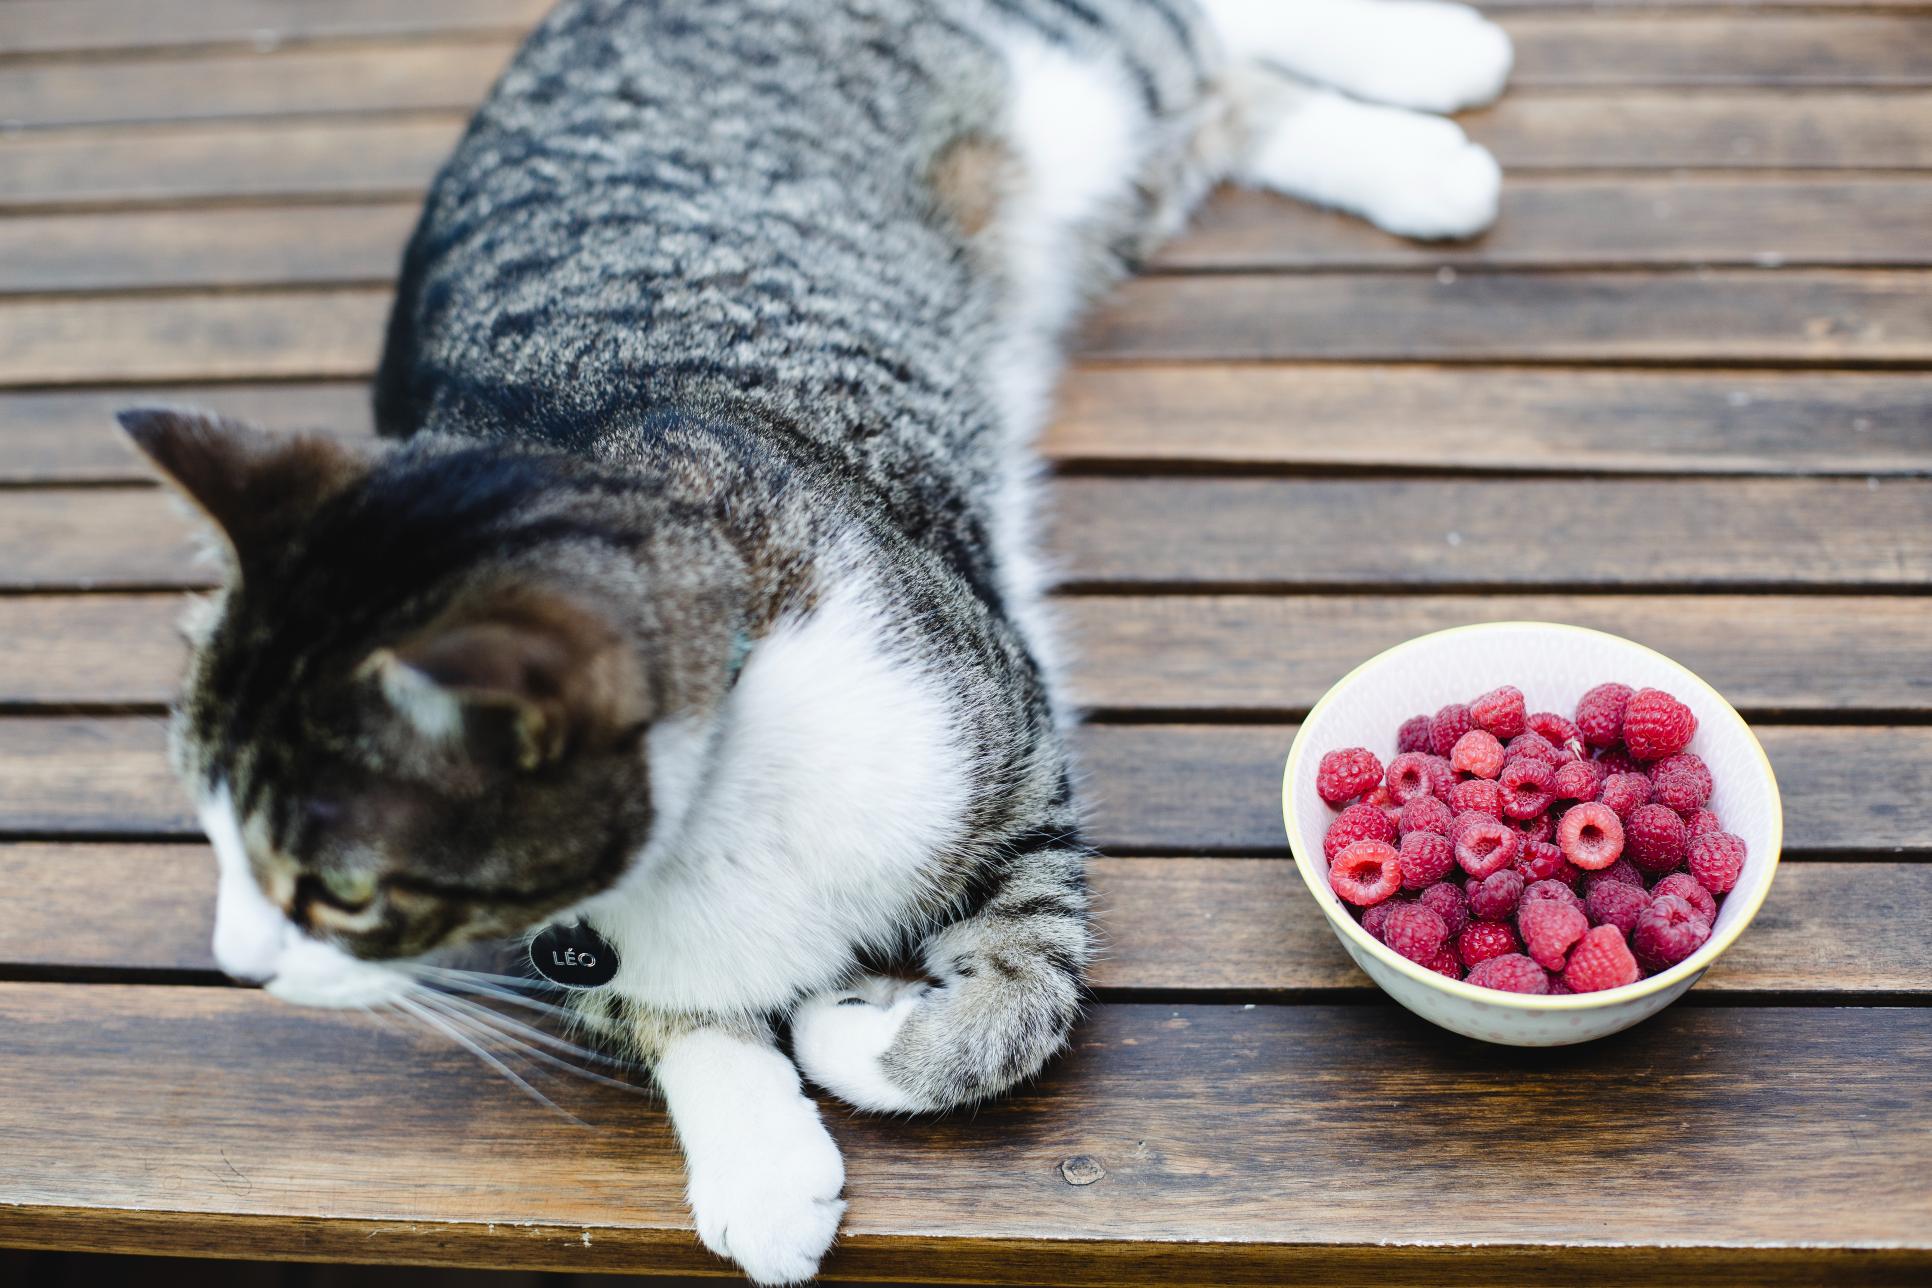 raspberries and a grey tabby cat.